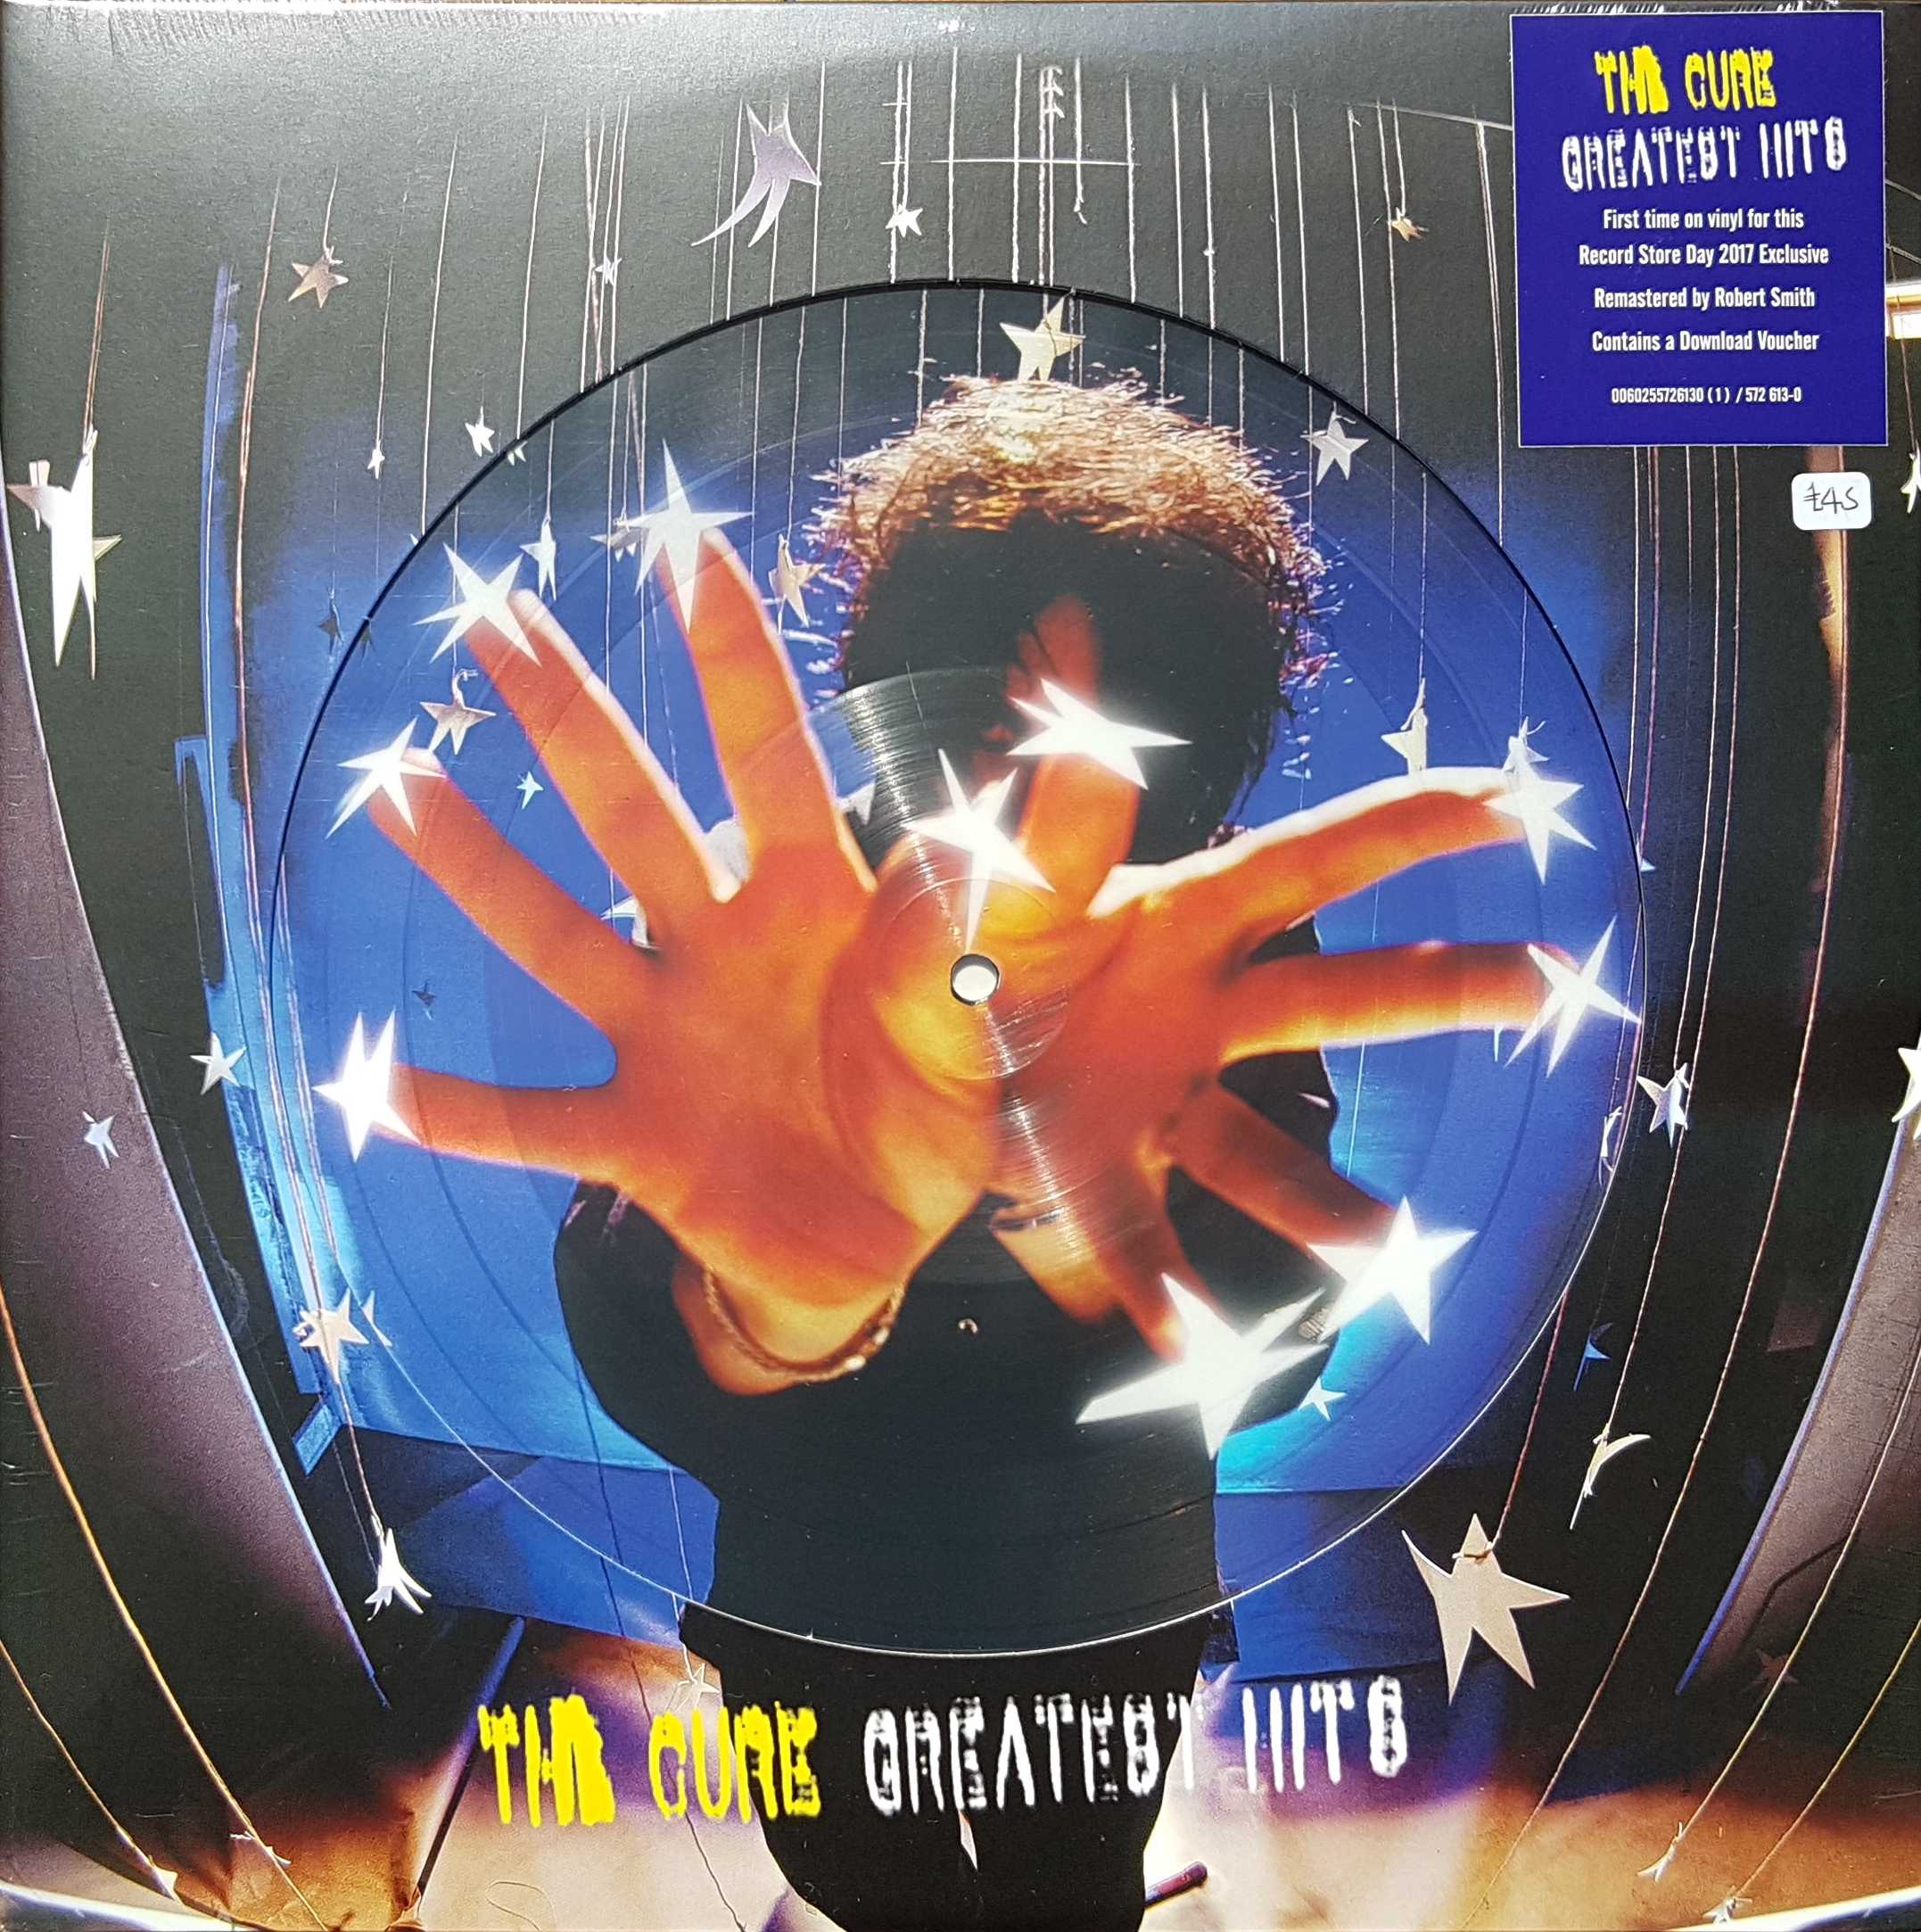 Picture of Greatest hits - Record Store Day 2017 by artist The Cure  